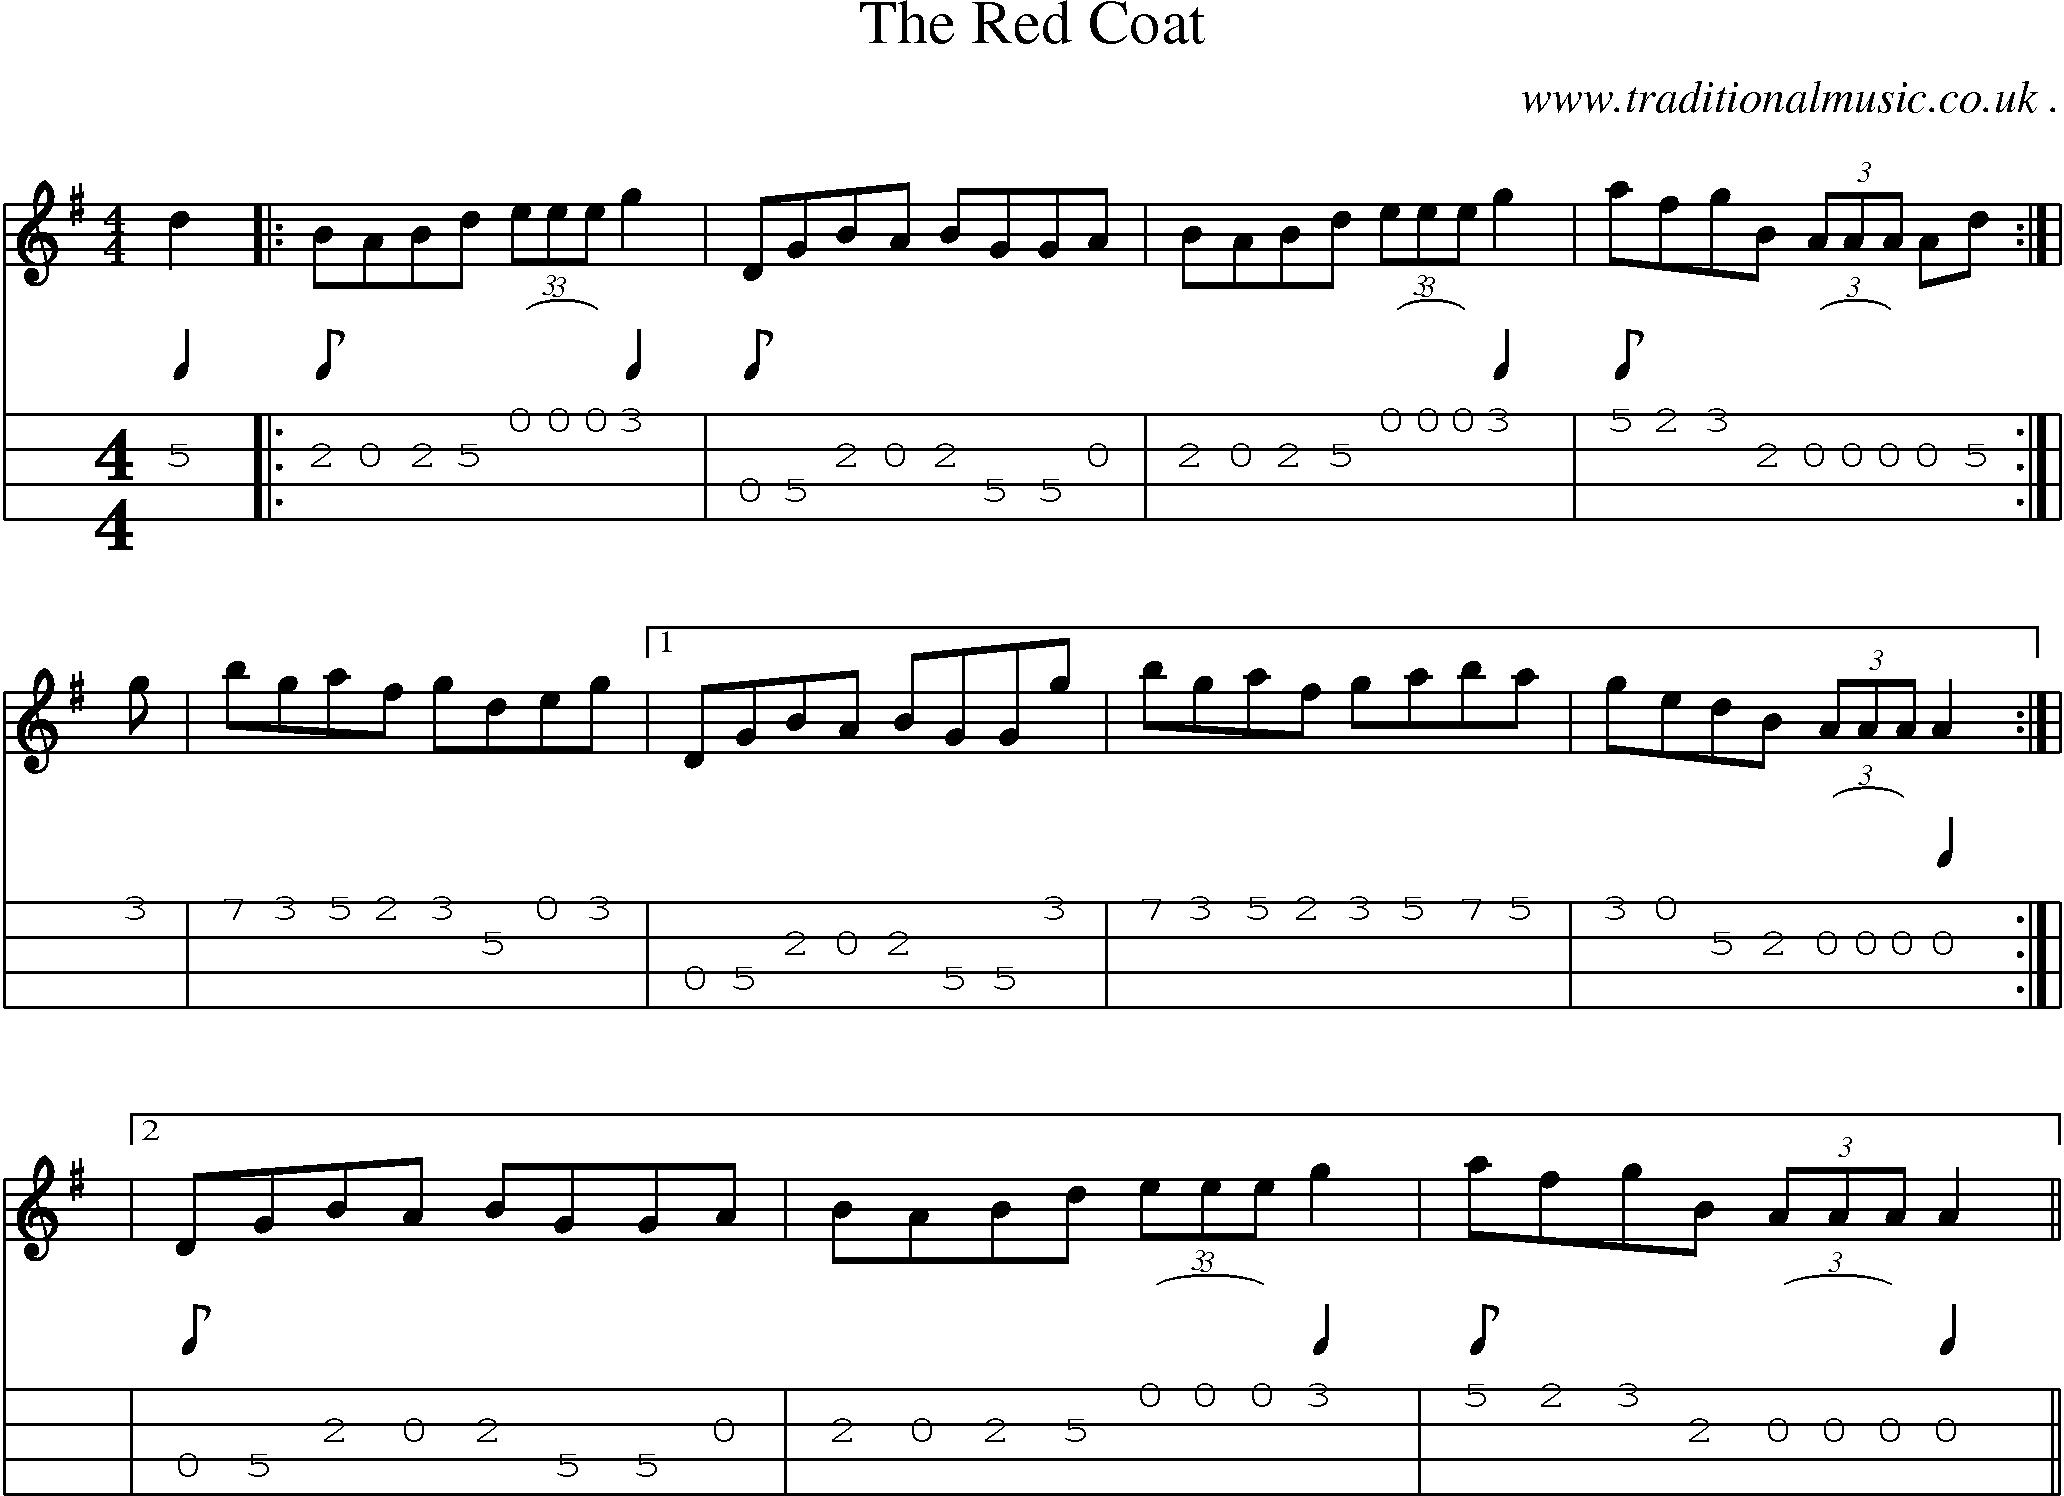 Music Score and Guitar Tabs for The Red Coat